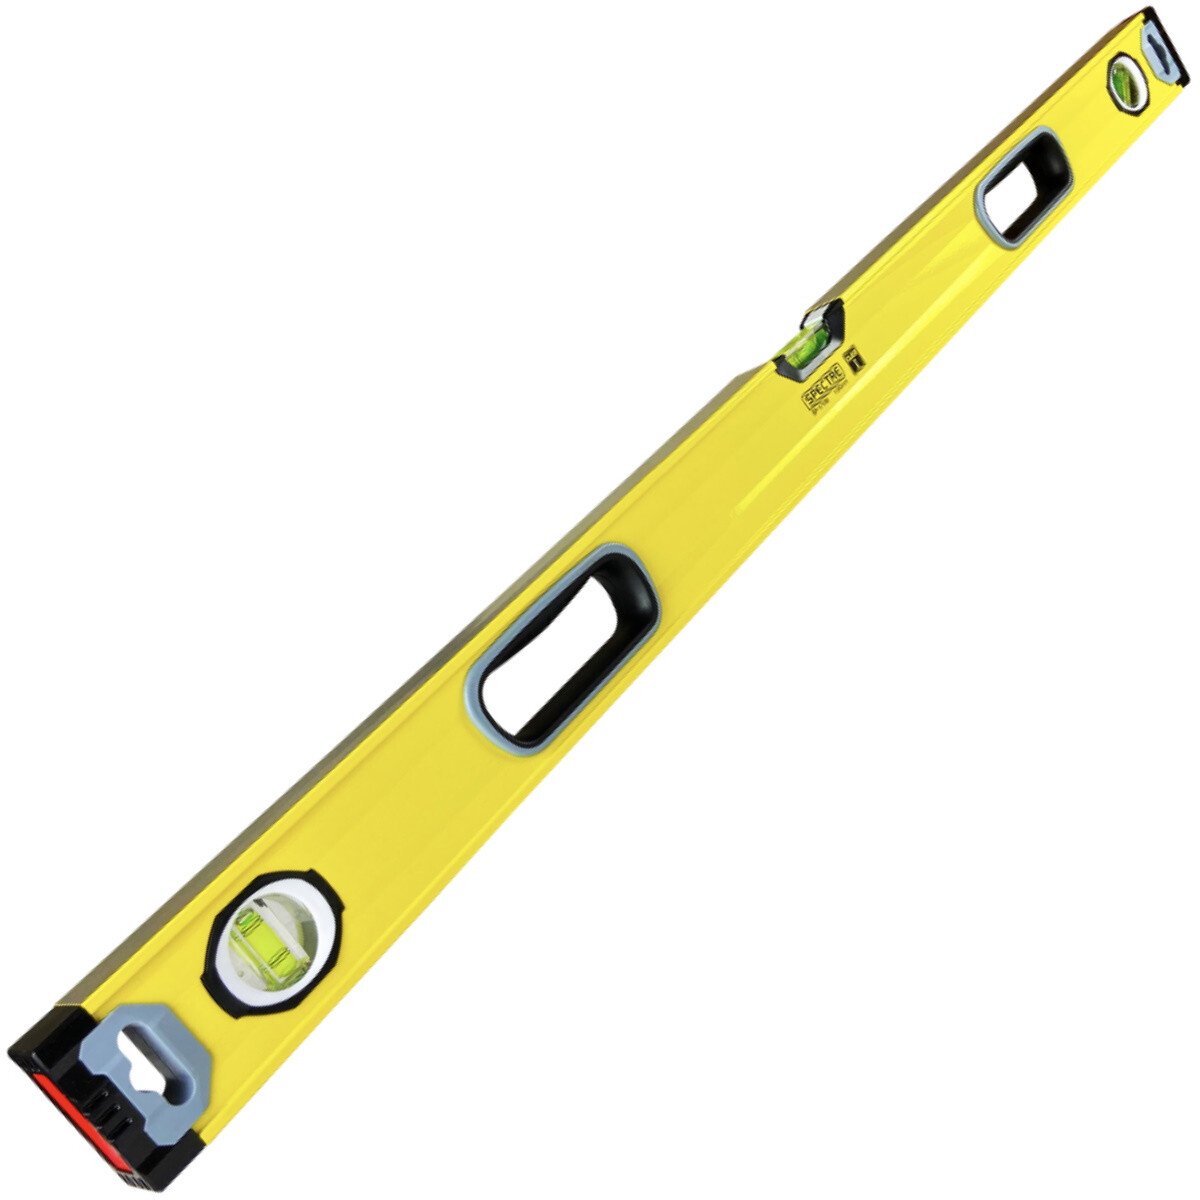 Spectre SP-17198 1000mm Box Section Spirit Level with Magnet